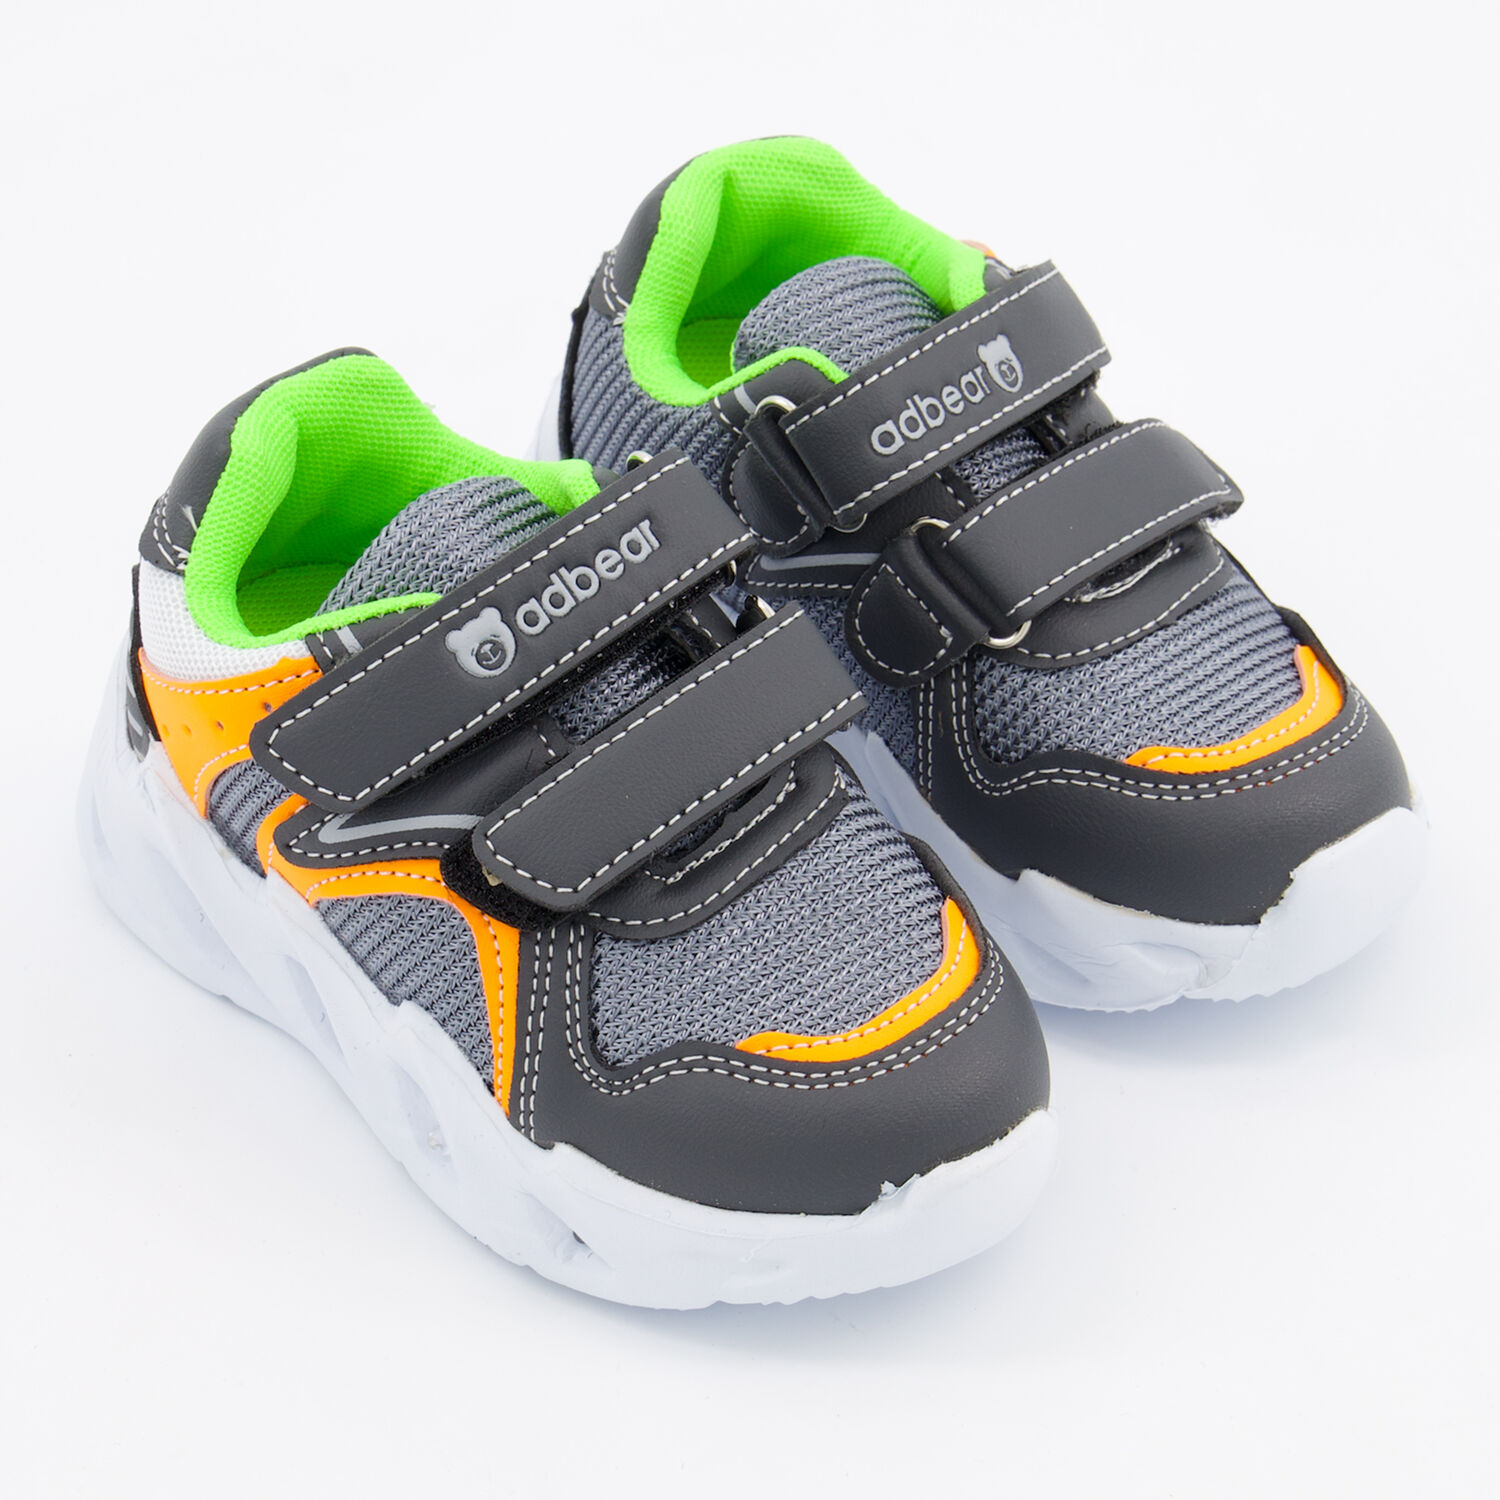 Kids Shoes and Trainers - TK Maxx UK